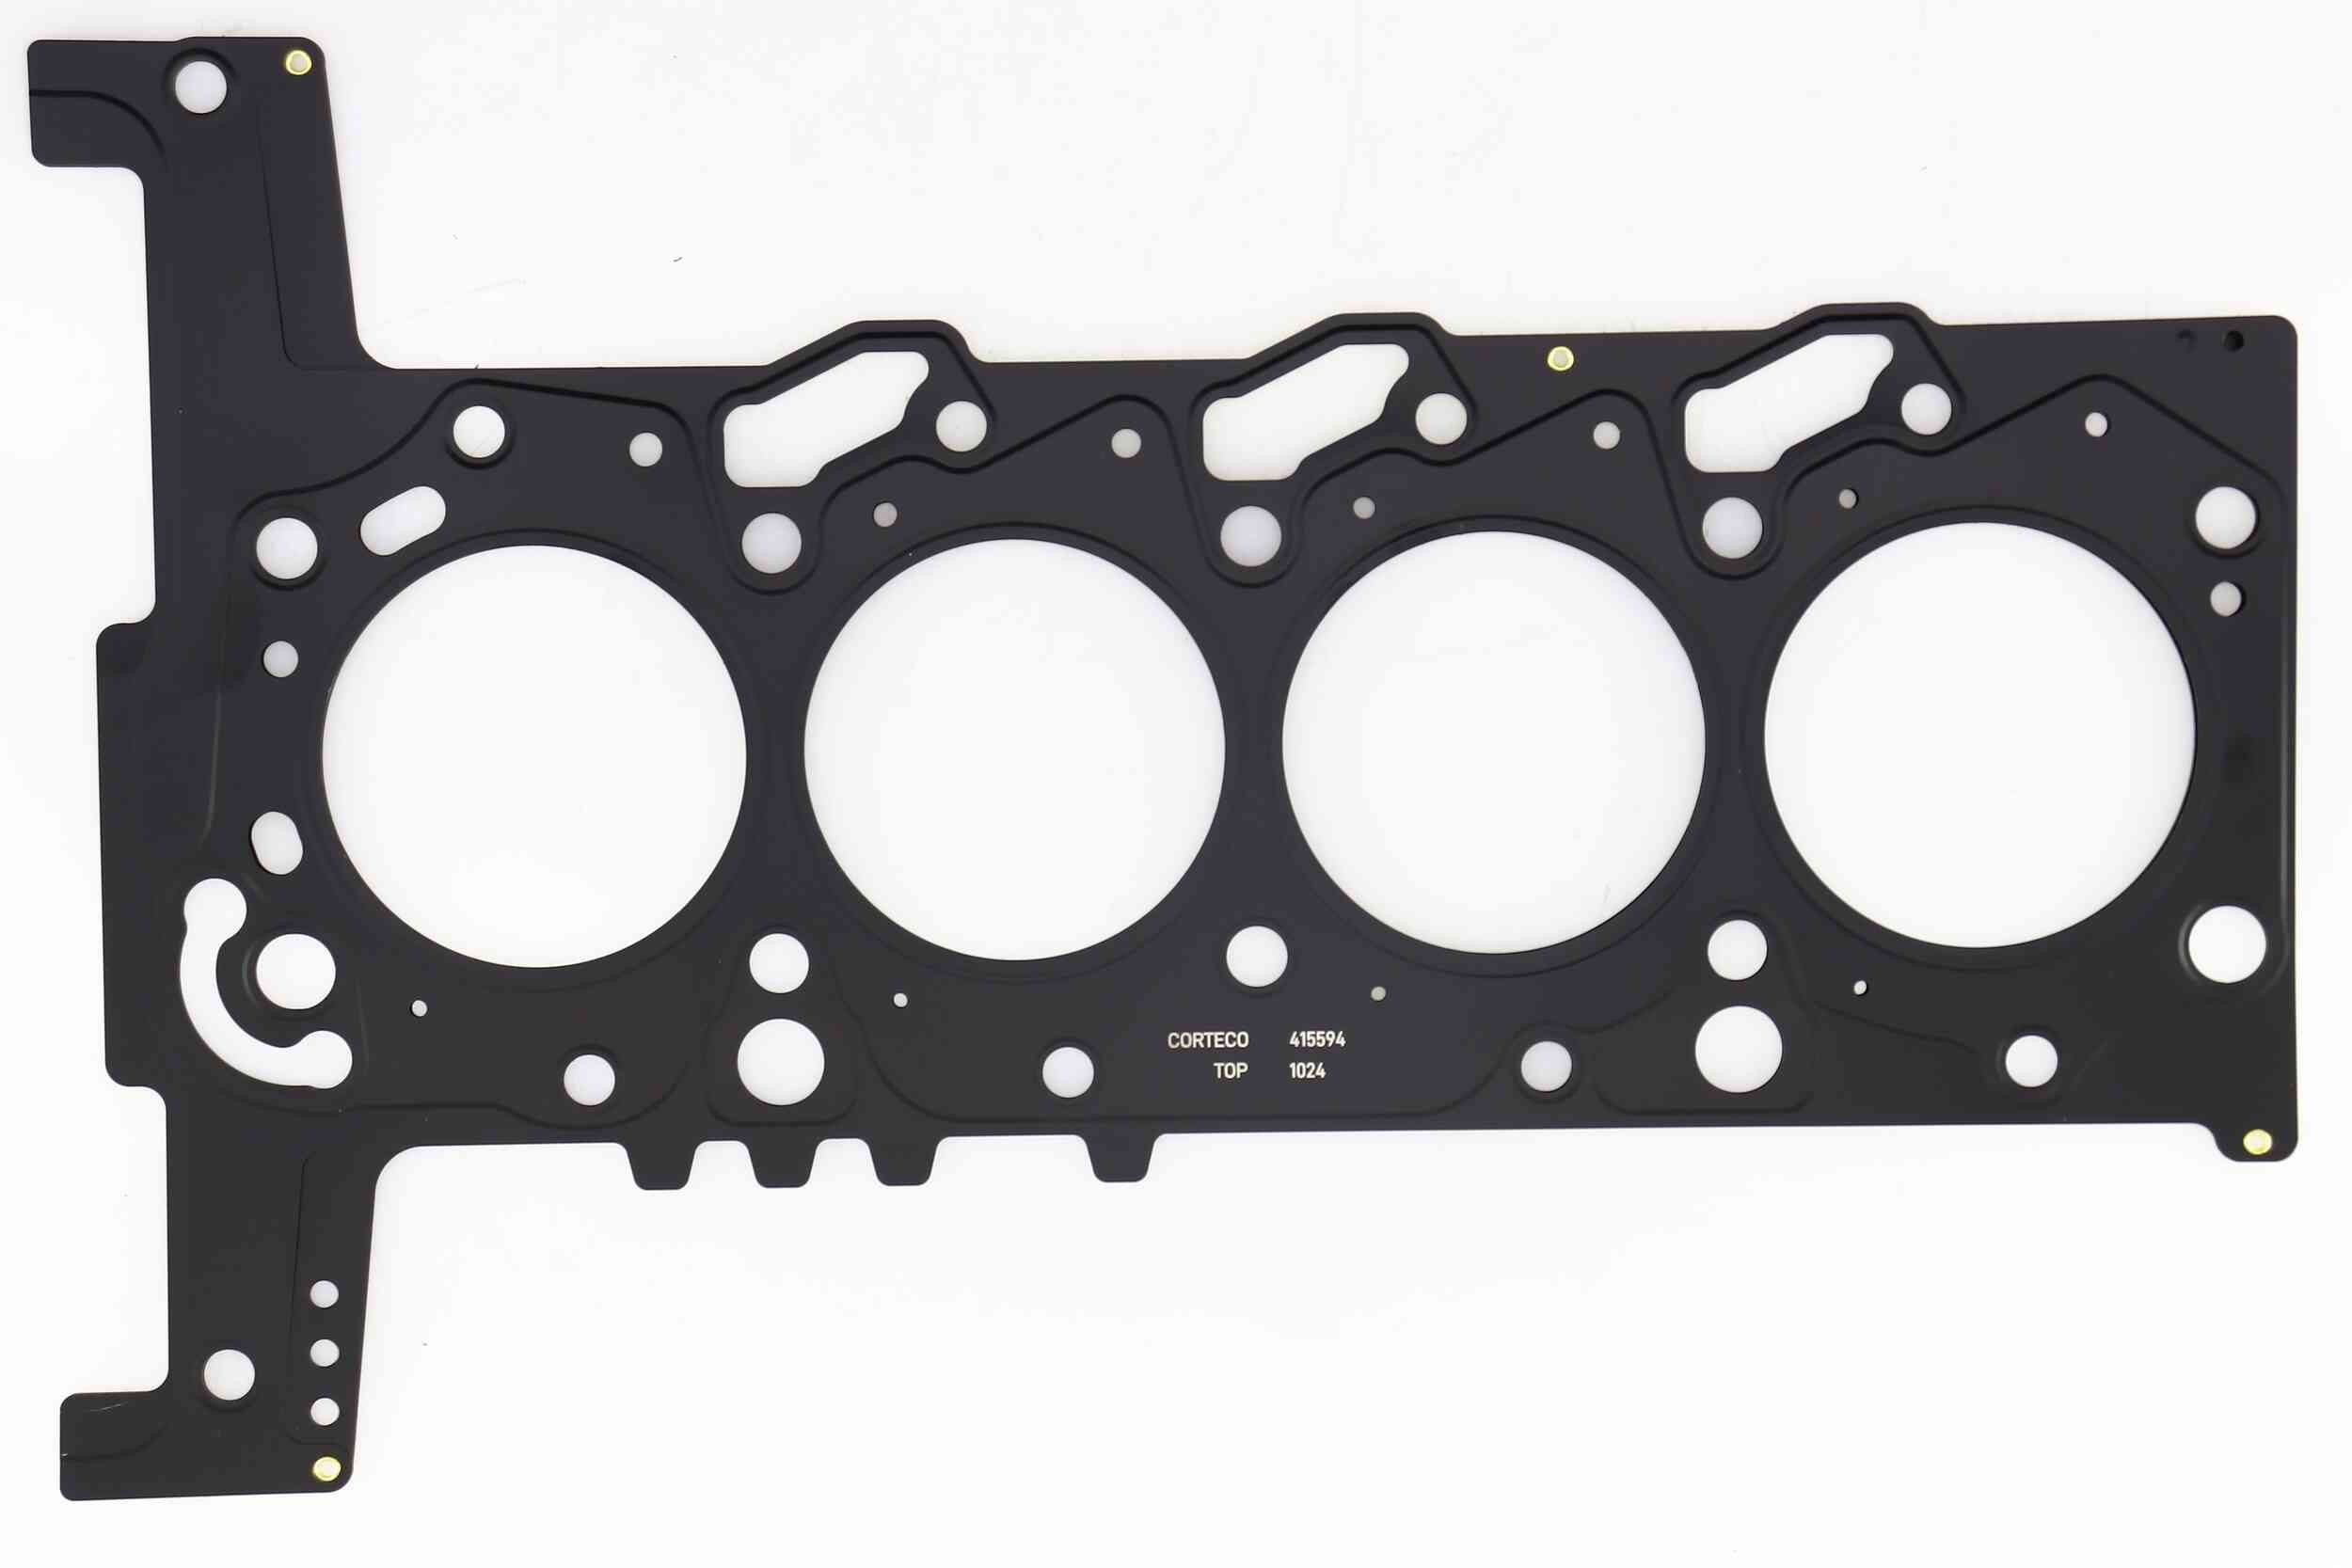 83415594 CORTECO 1,20 mm, Metal, Notches/Holes Number: 3 Head Gasket 415594P buy